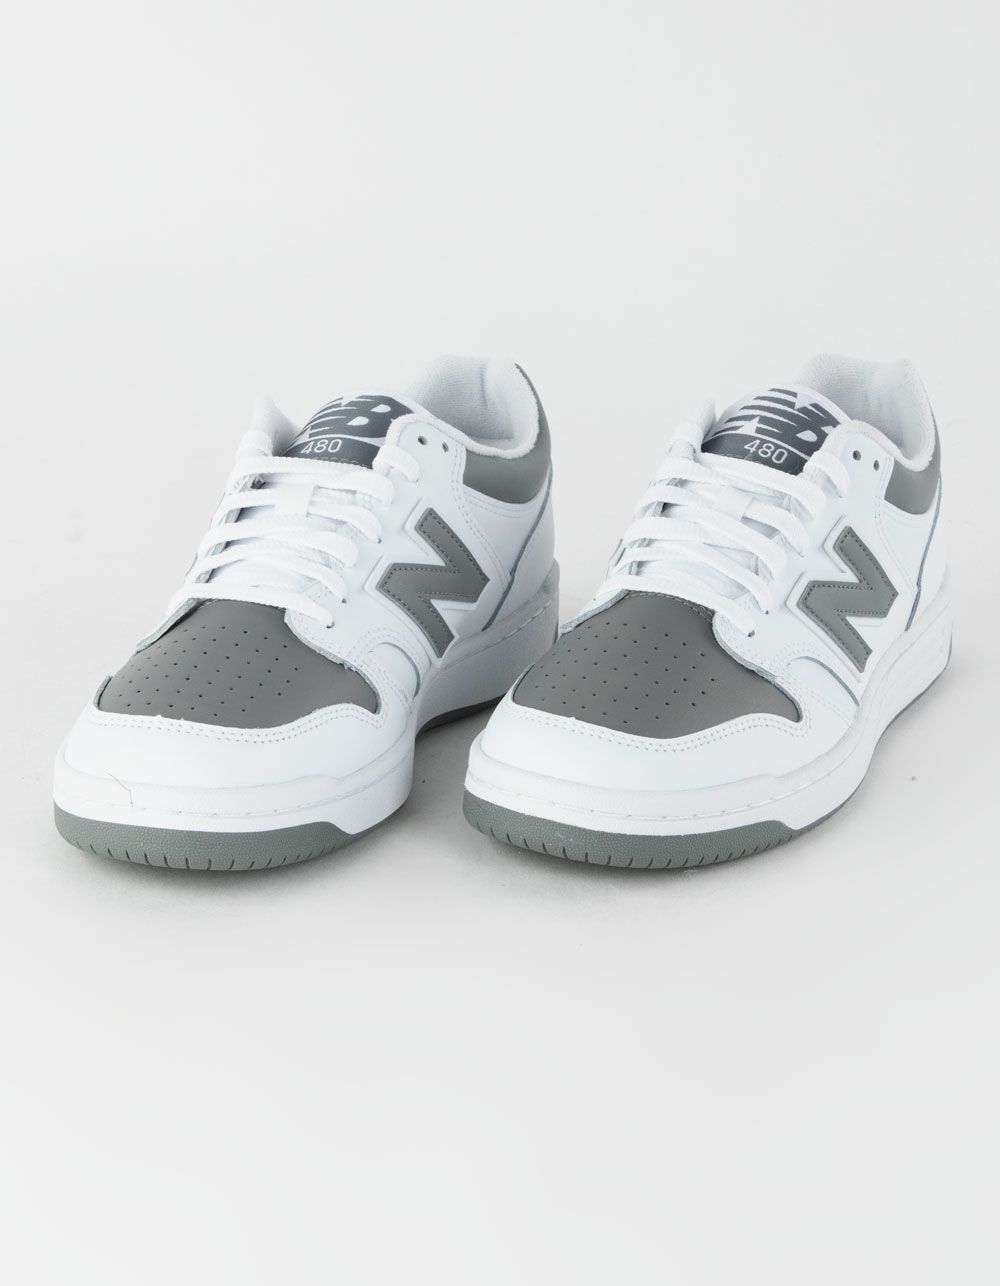 New Balance Mens Shoes Wht Gray Tillys